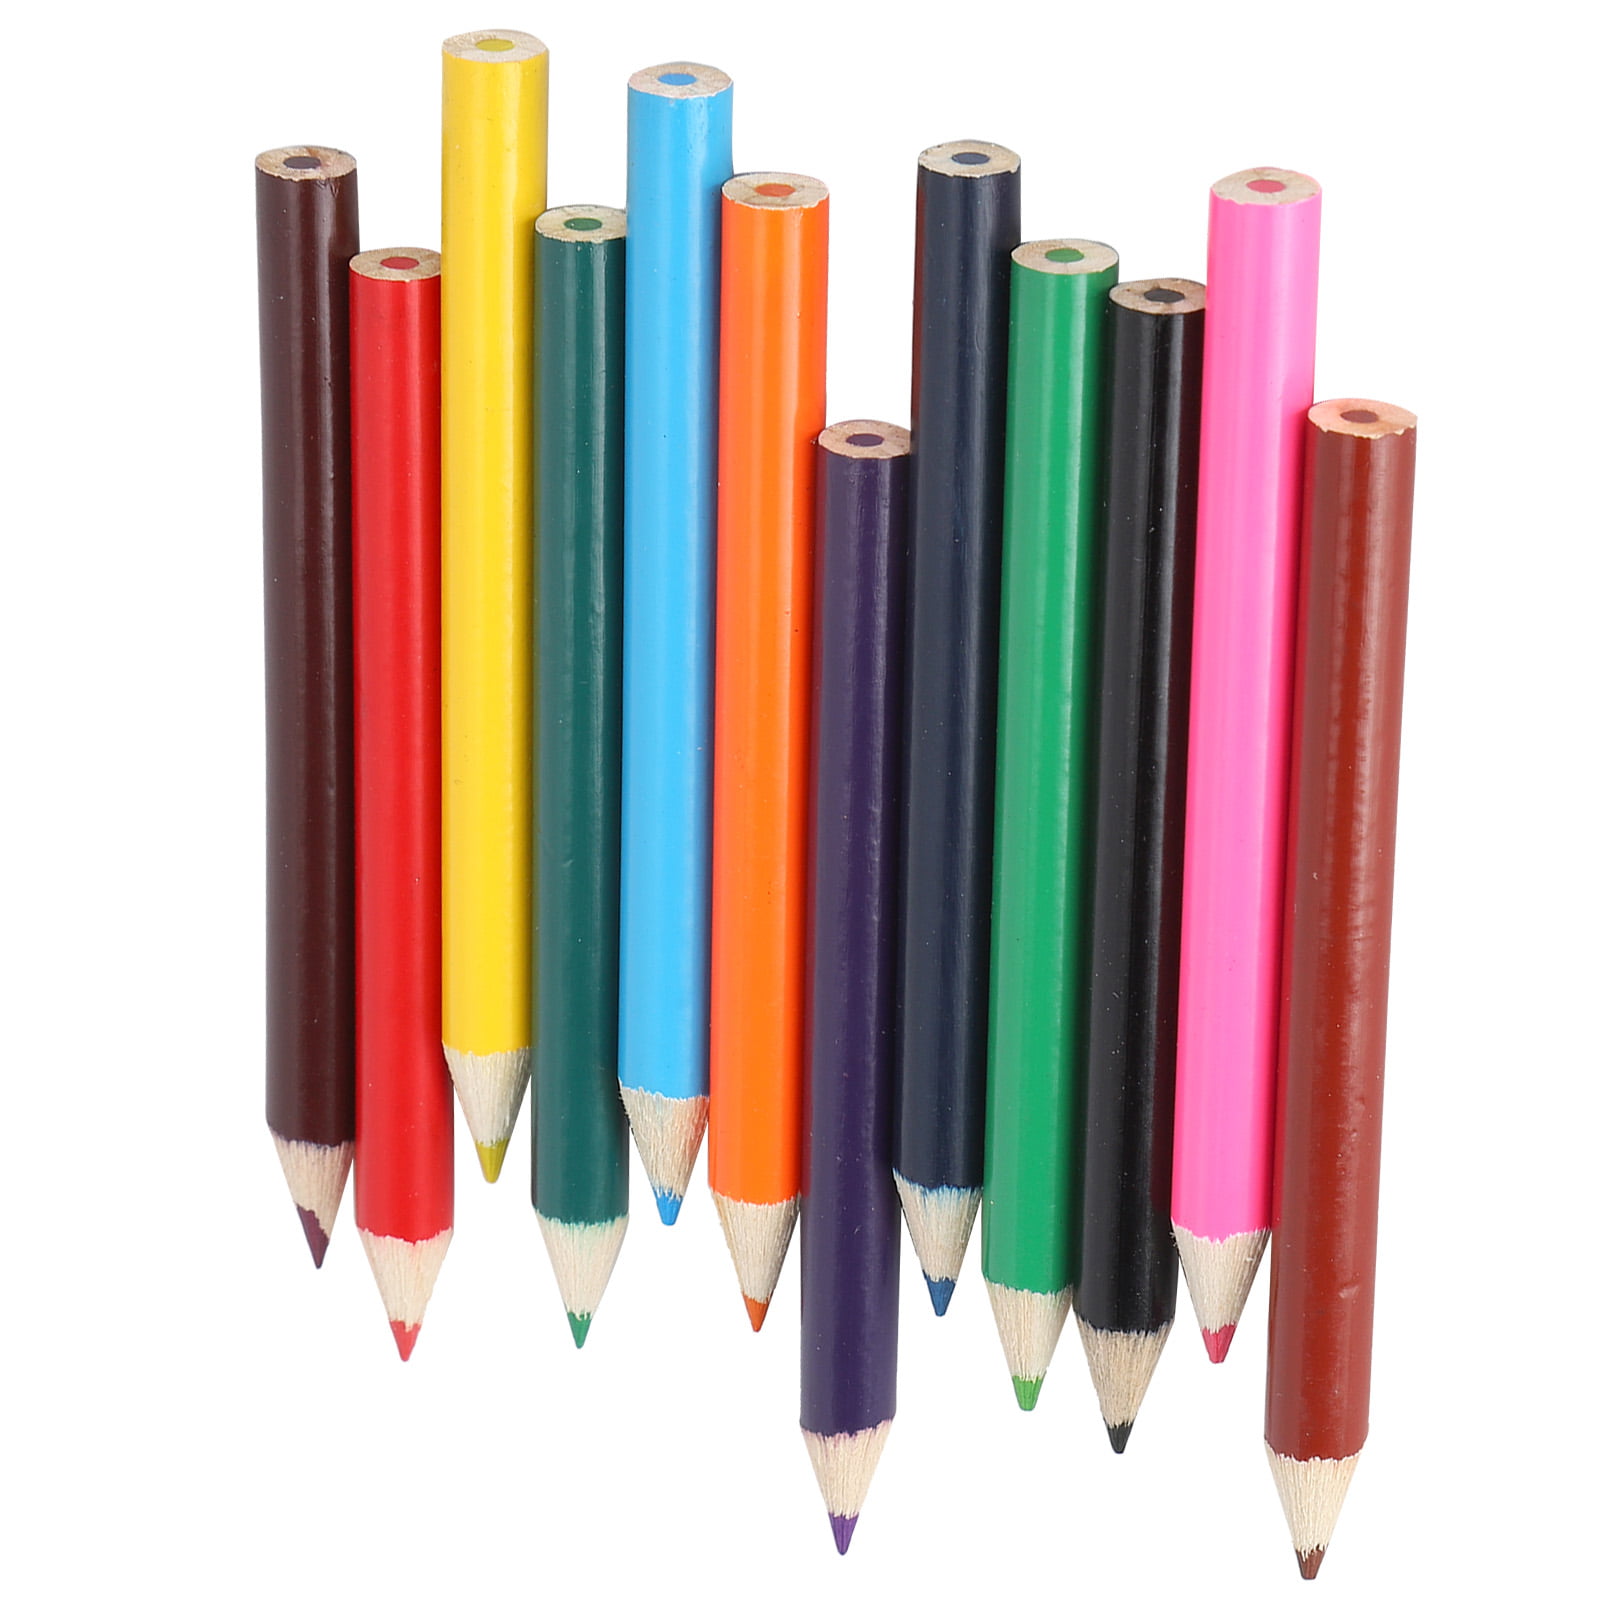 Woodfree Pastel Colored Pencils Made Of Plastic $0.28 - Wholesale China  Color Pencil at factory prices from Dalian Golden Time Enterprise Co. Ltd